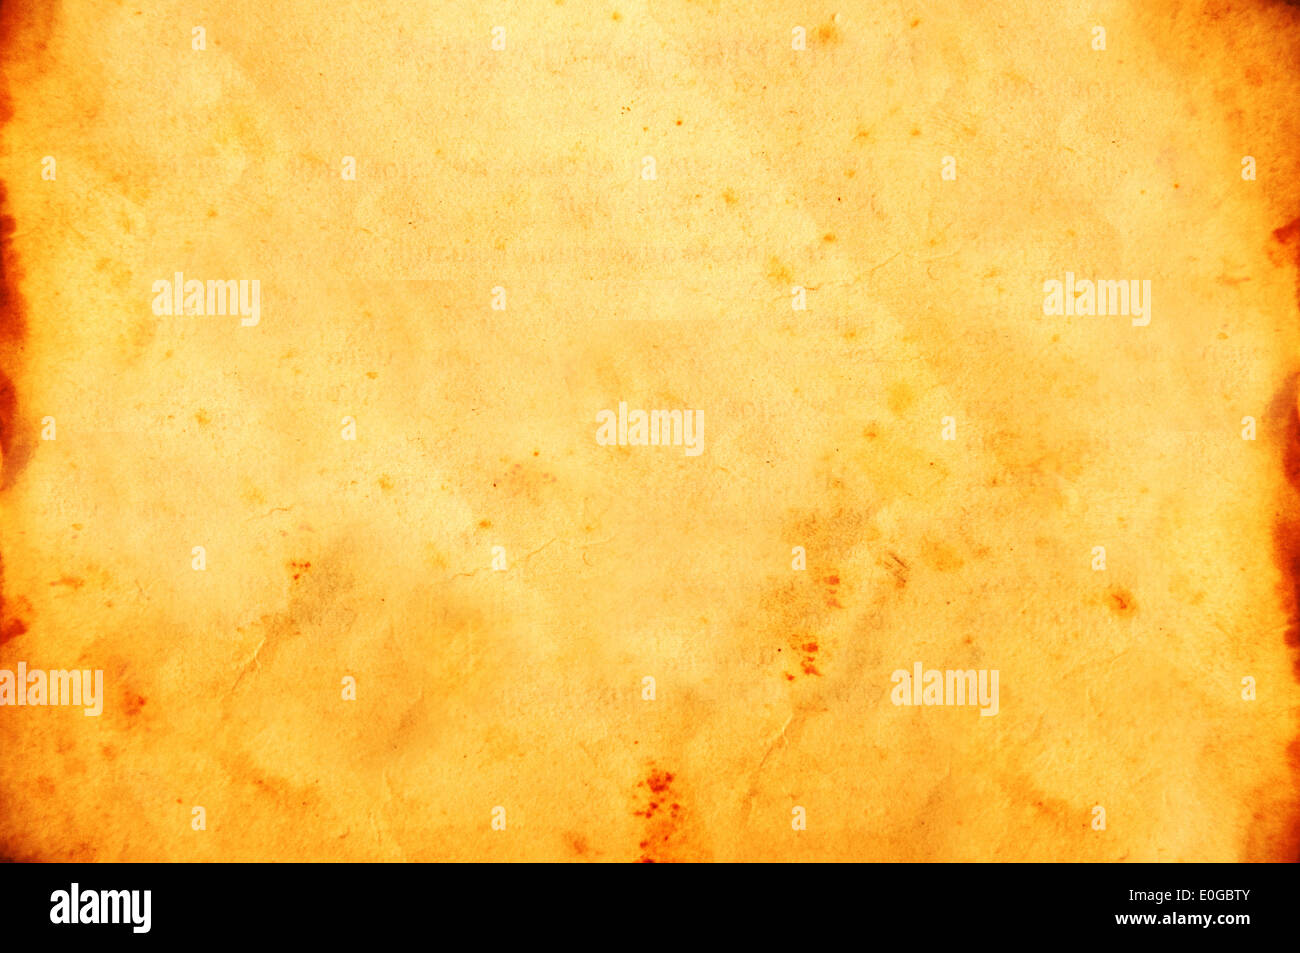 Vintage grunge old paper texture as background with space for text or image. Stock Photo